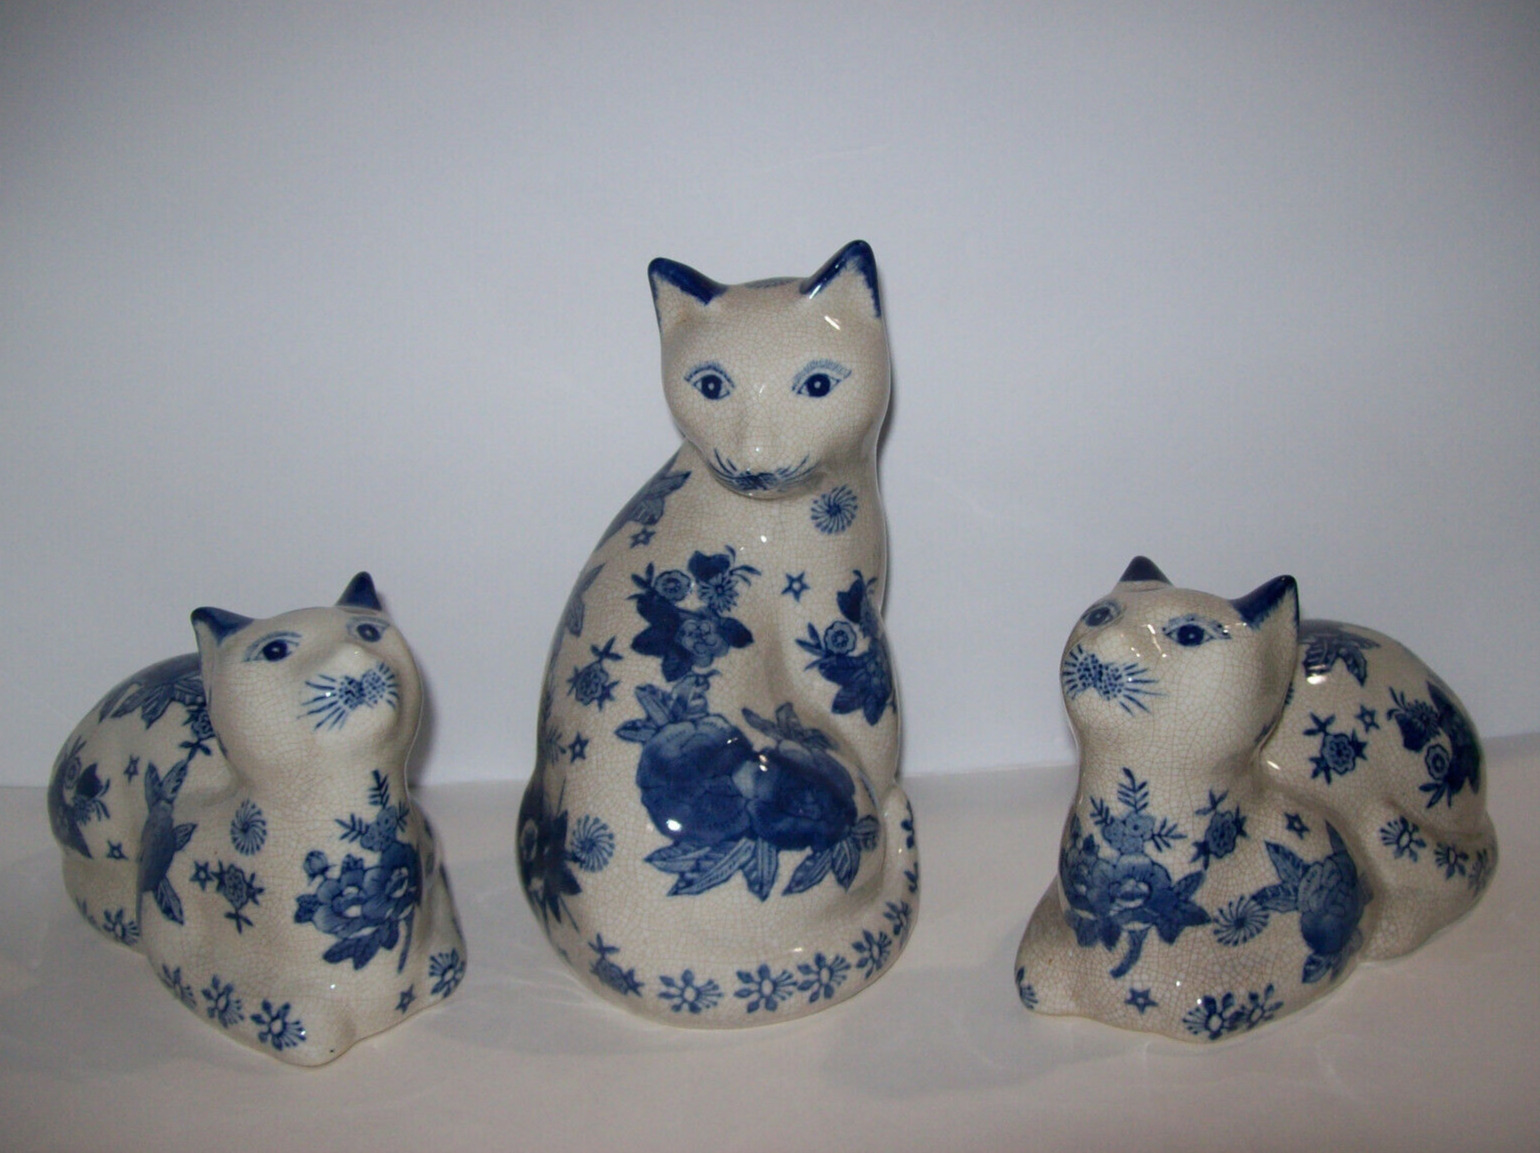 Lot of 3 Vintage Delft Blue Set of Ceramic Hand Painted Cat Figurines